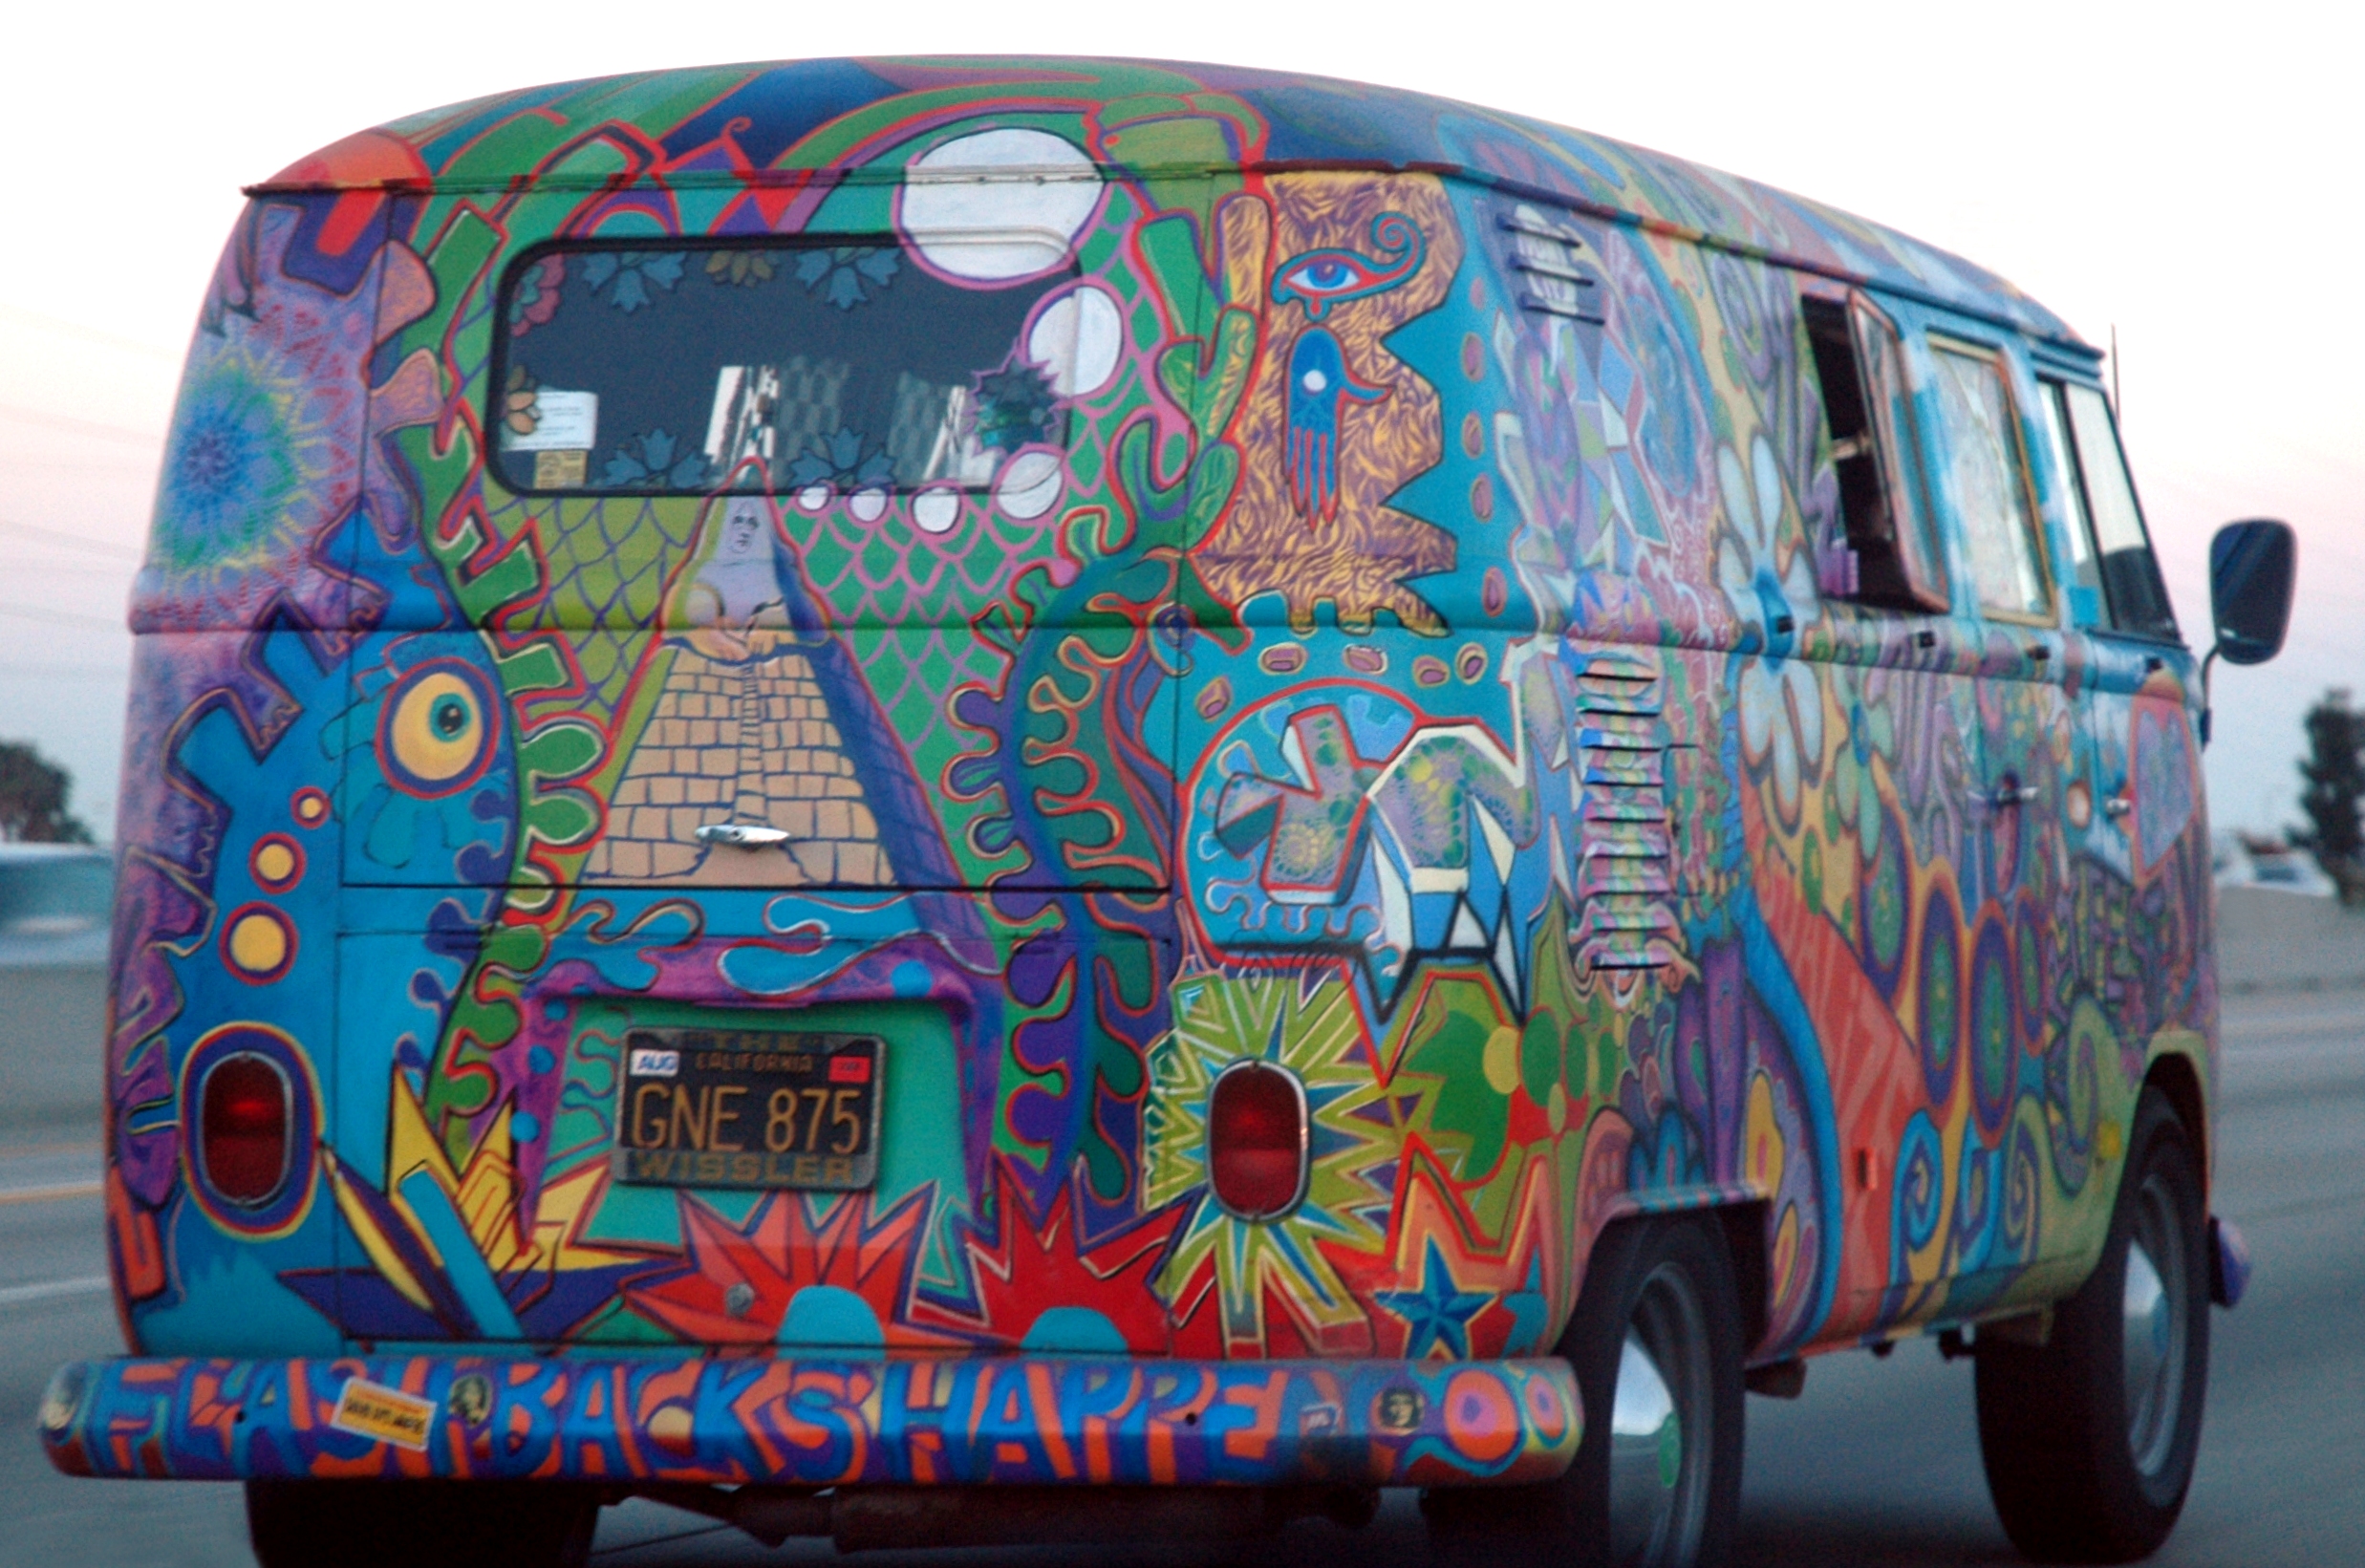 VW_Bus_T1_in_Hippie_Colors_2_retouched.jpg (2475×1641)